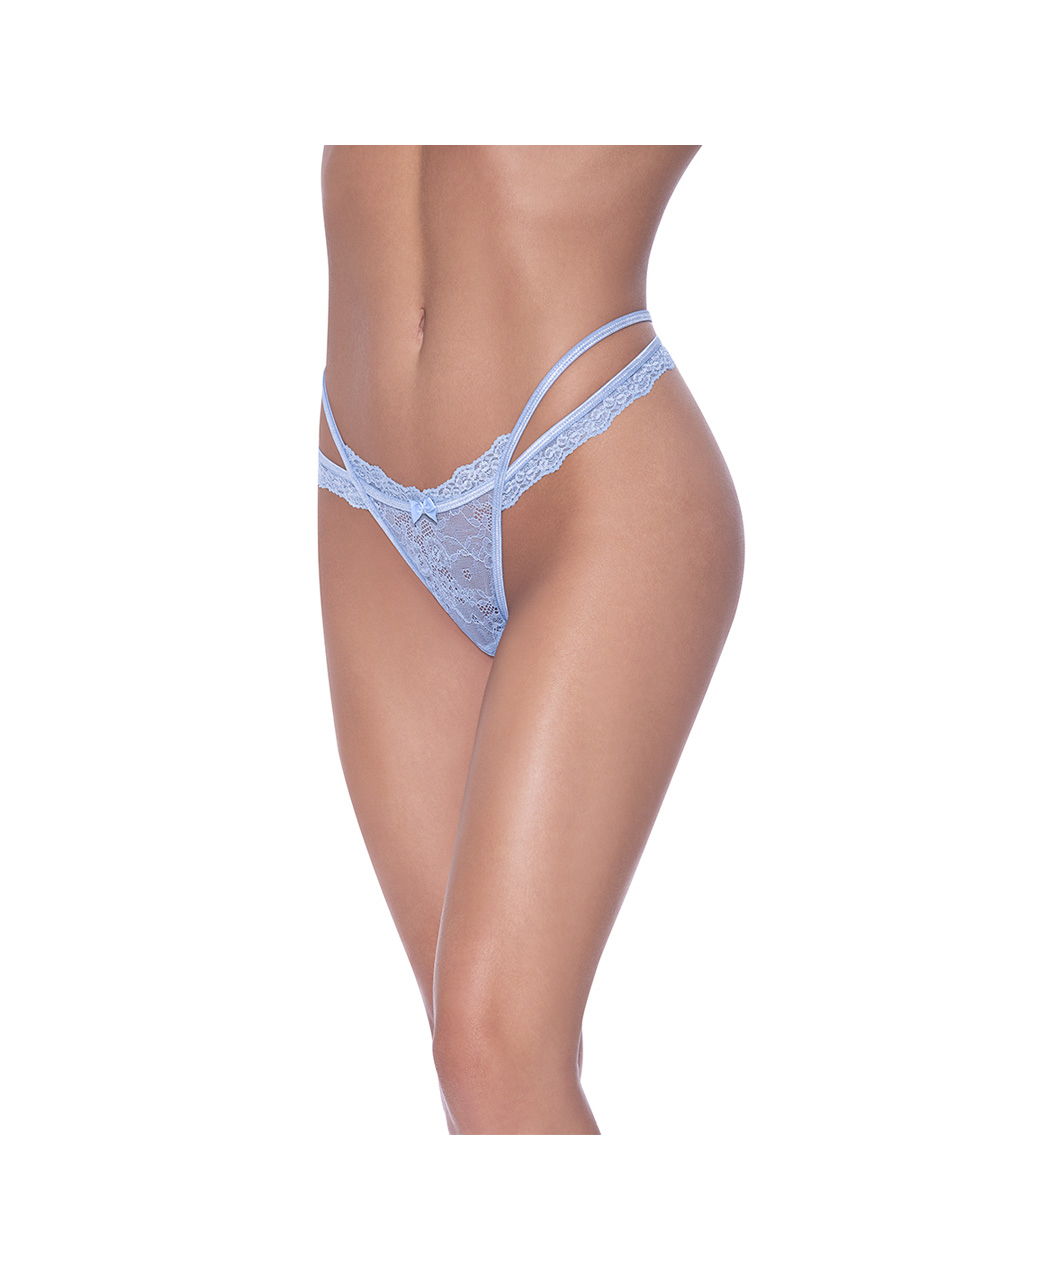 Exposed periwinkle crotchless string